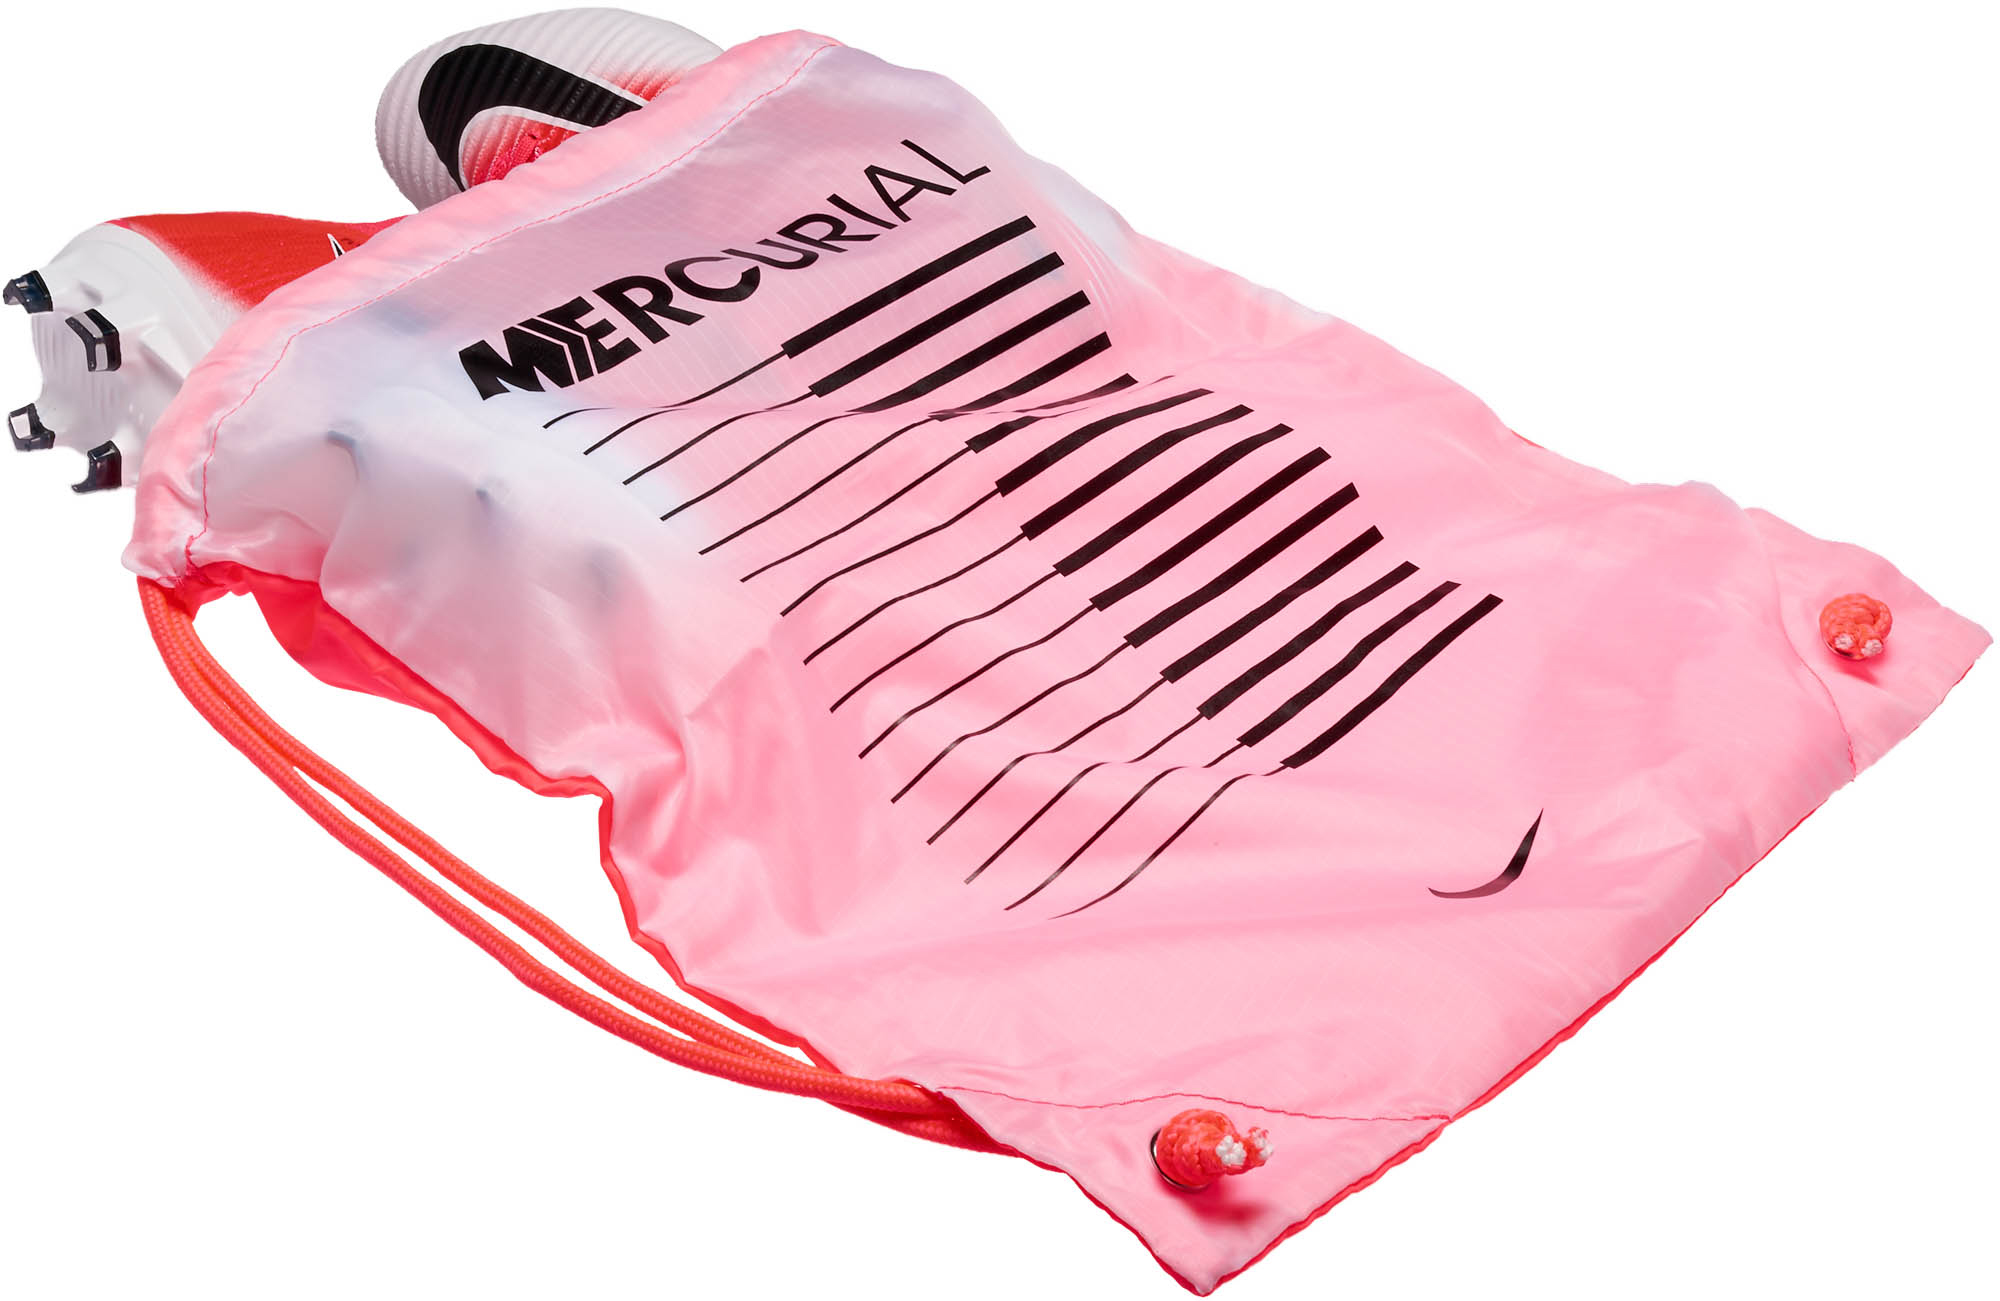 nike mercurial superfly 5 pink and white